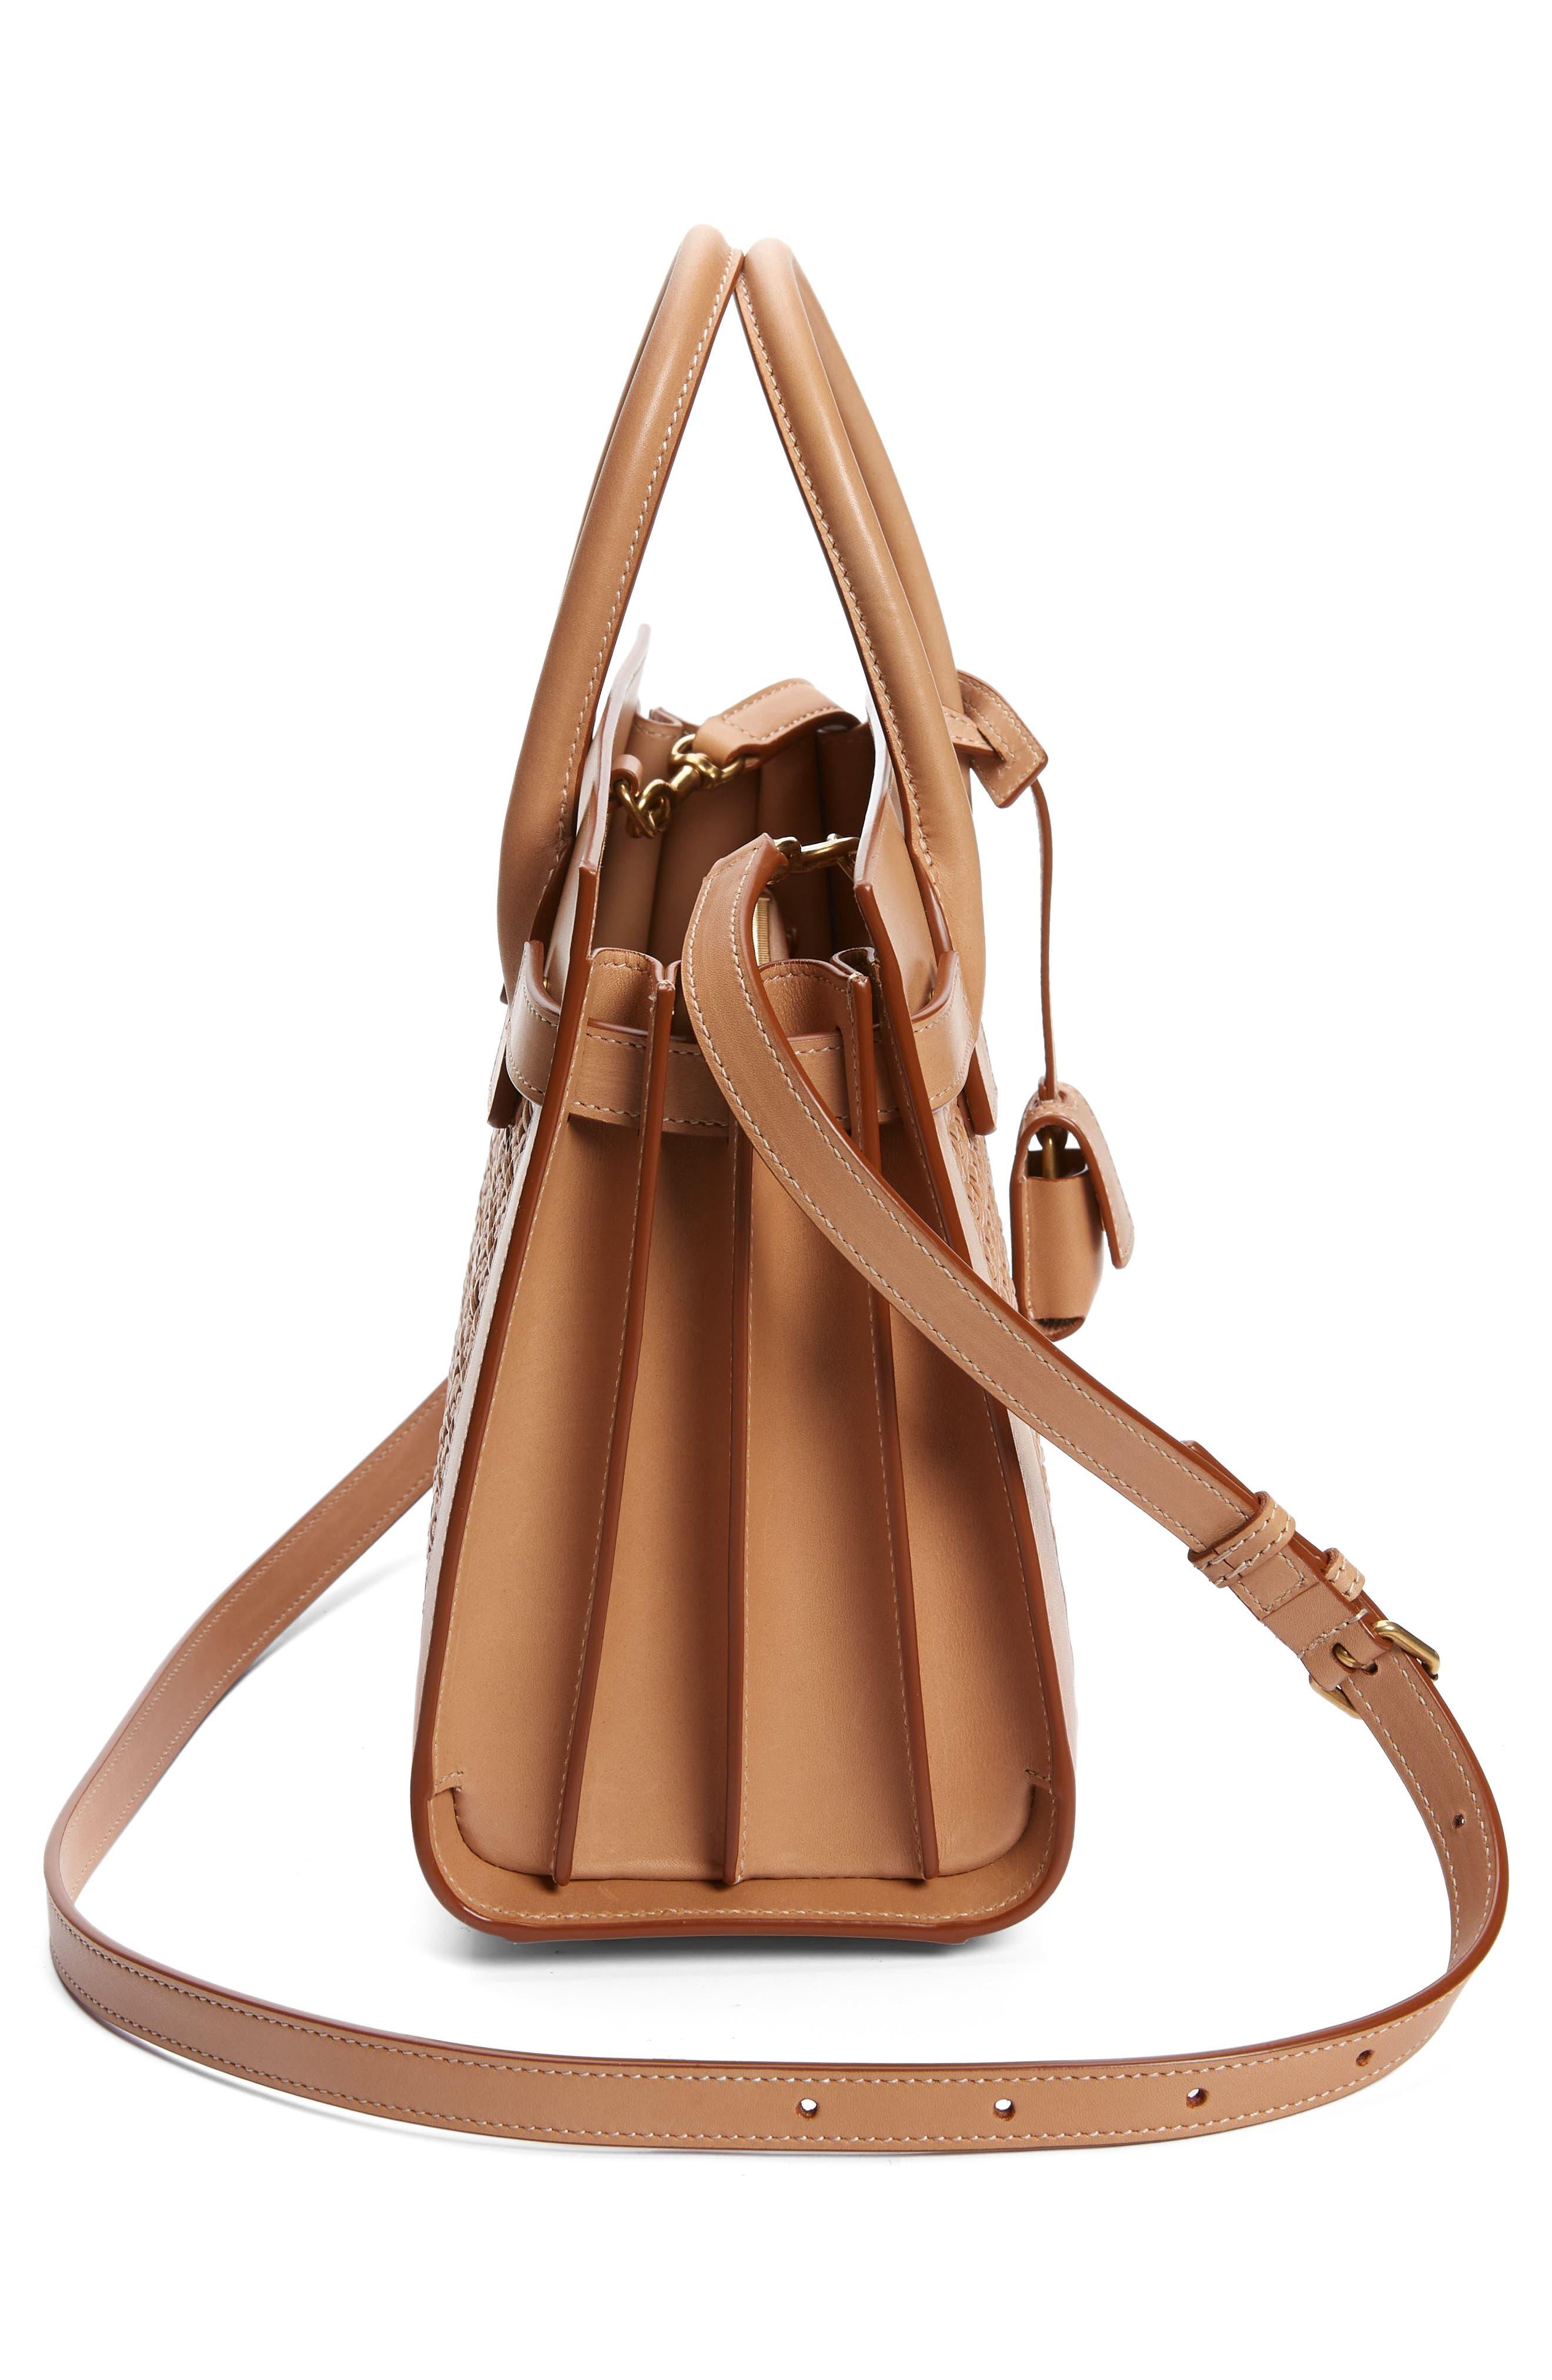 Saint Laurent Sac De Jour Baby In Canework Vegetable-tanned Leather in  Natural